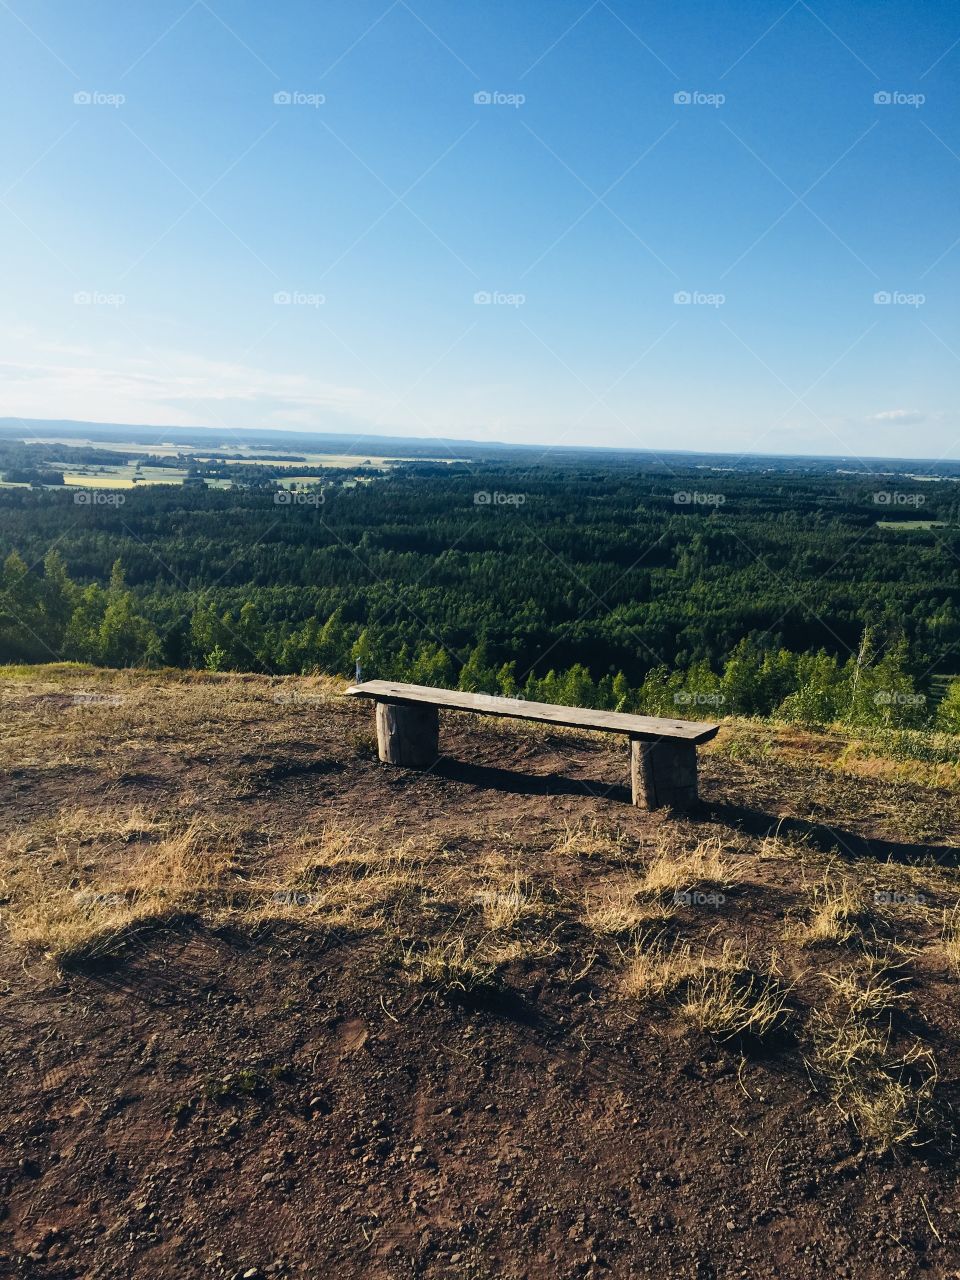 Bench on hill